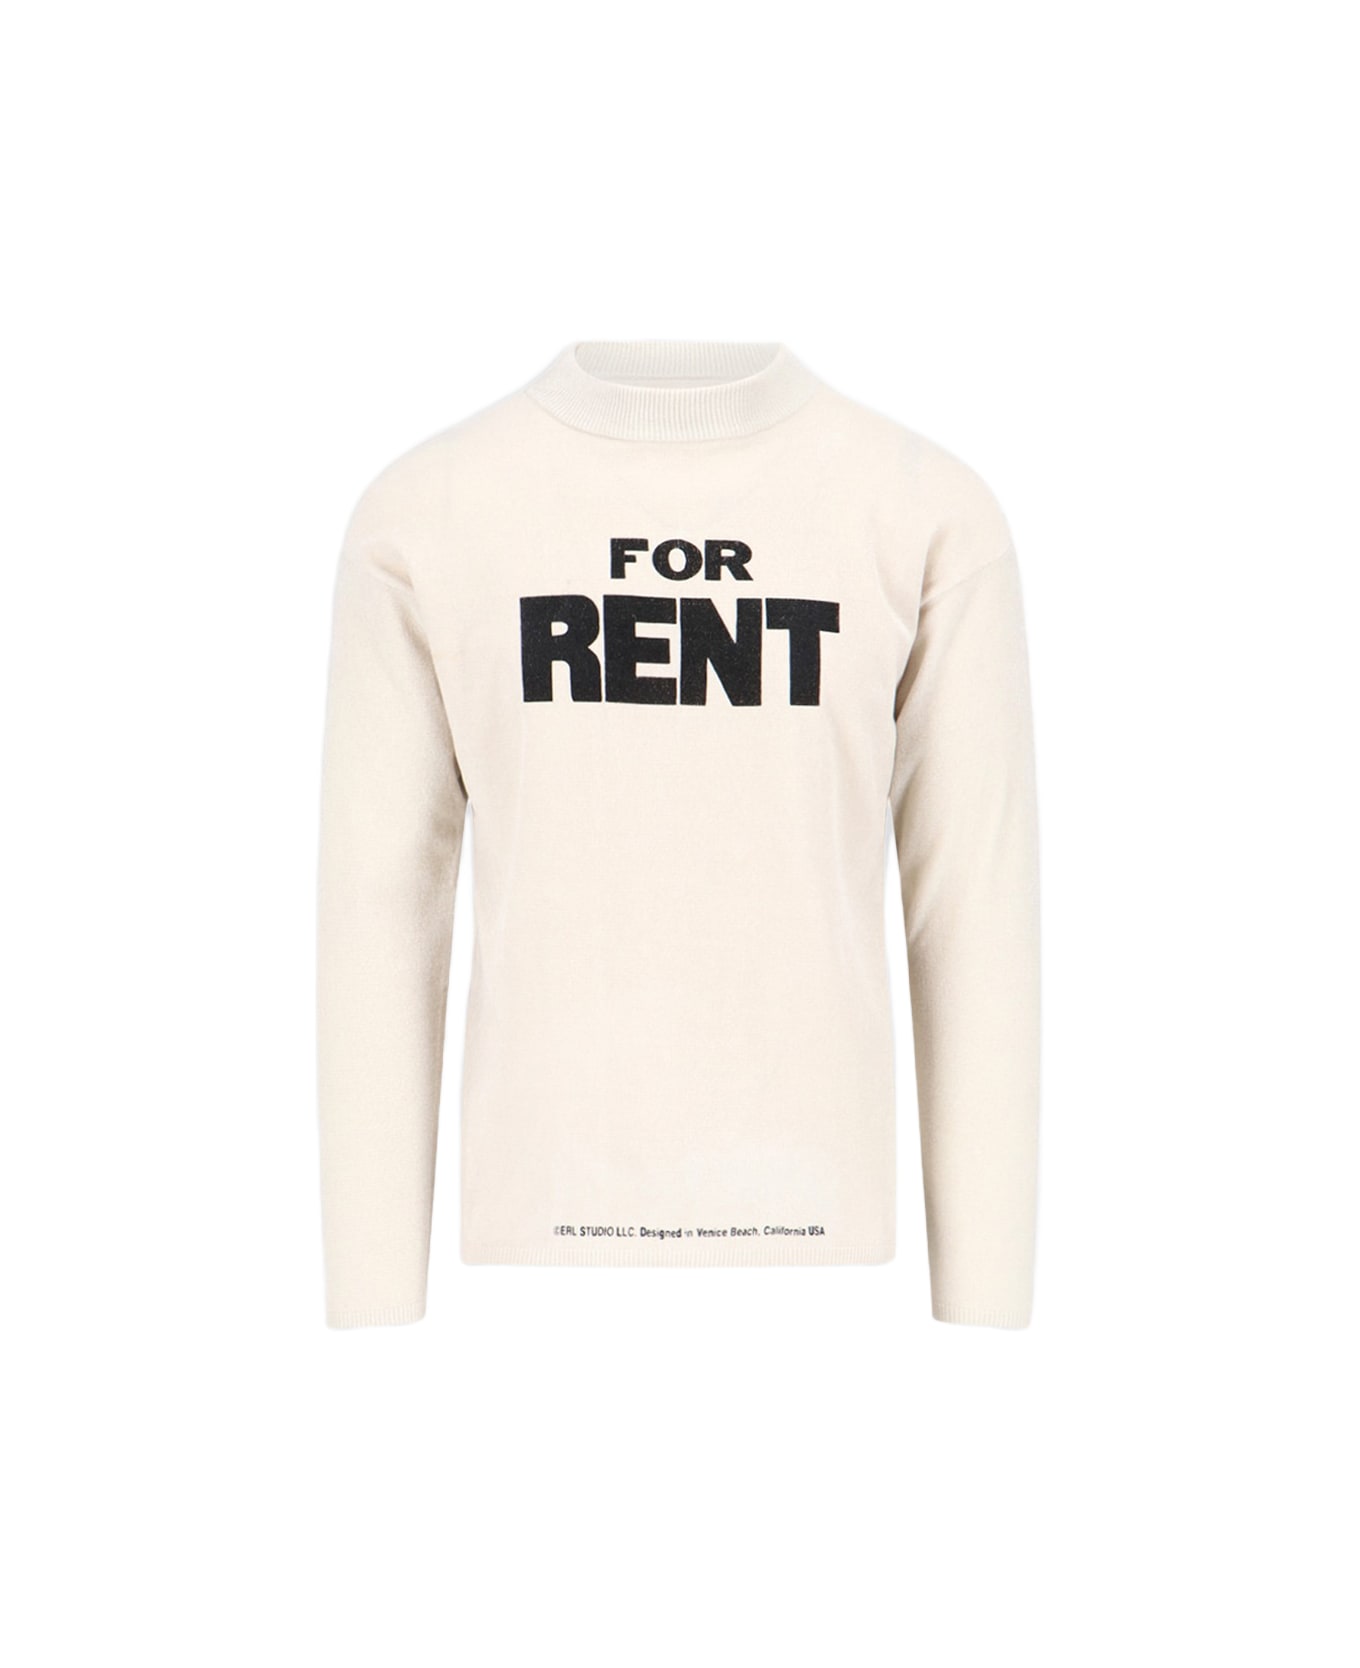 ERL Unisex For Rent Sweater Knit Off White Knitted T-shirt With Long Sleeves - Unisex For Rent Sweater Knit - WHITE ニットウェア